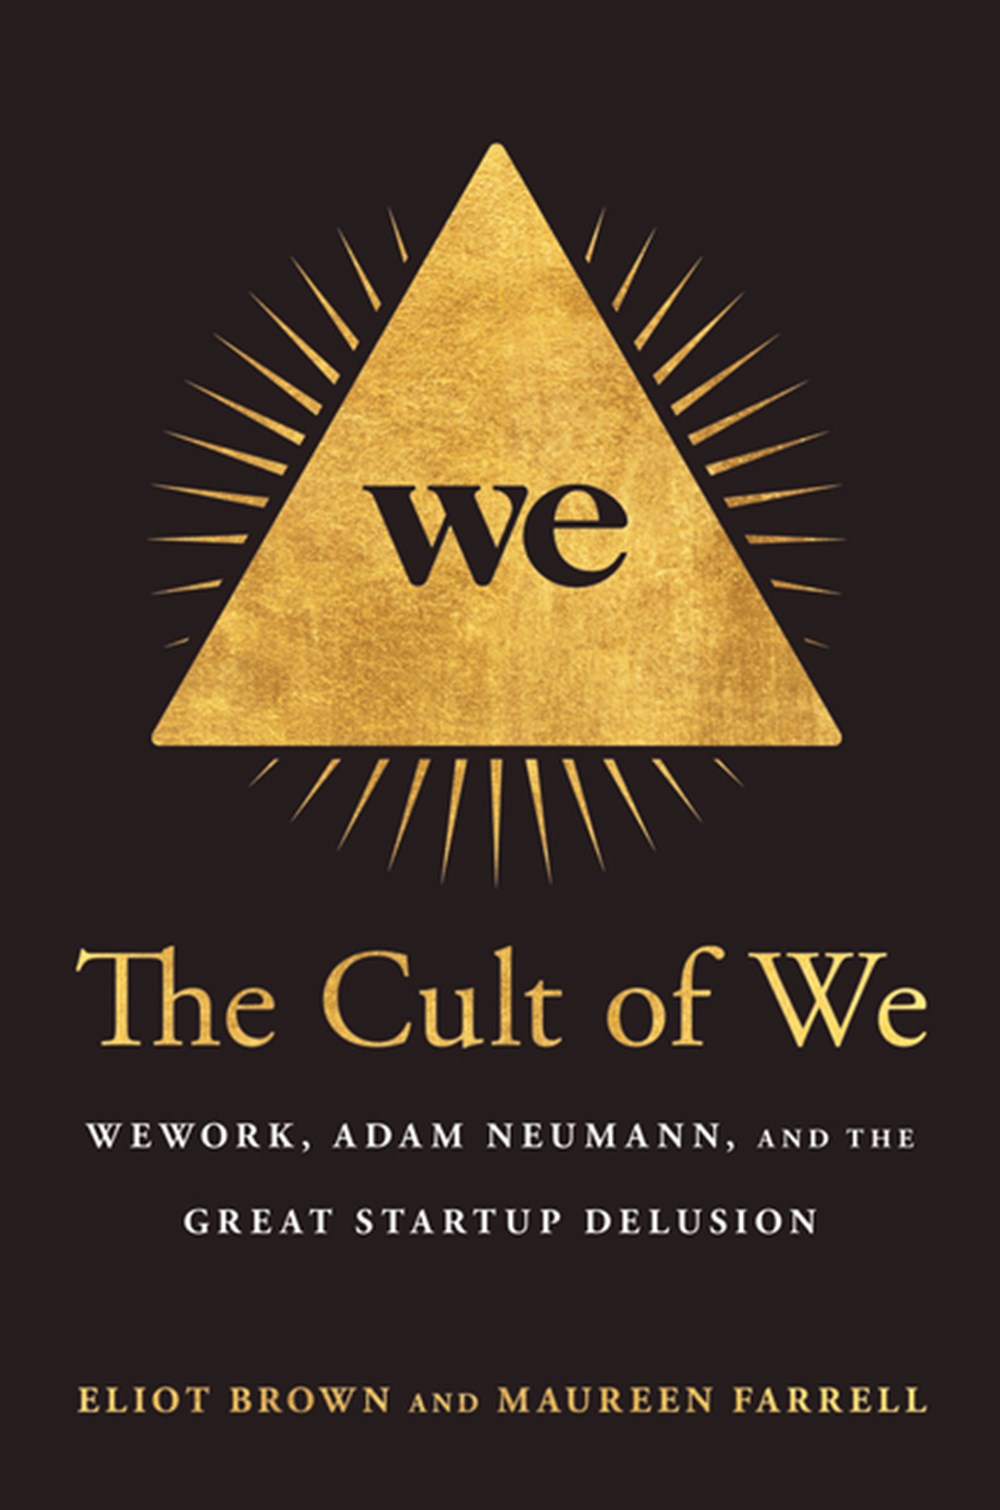 Cult of We Wework, Adam Neumann, and the Great Startup Delusion